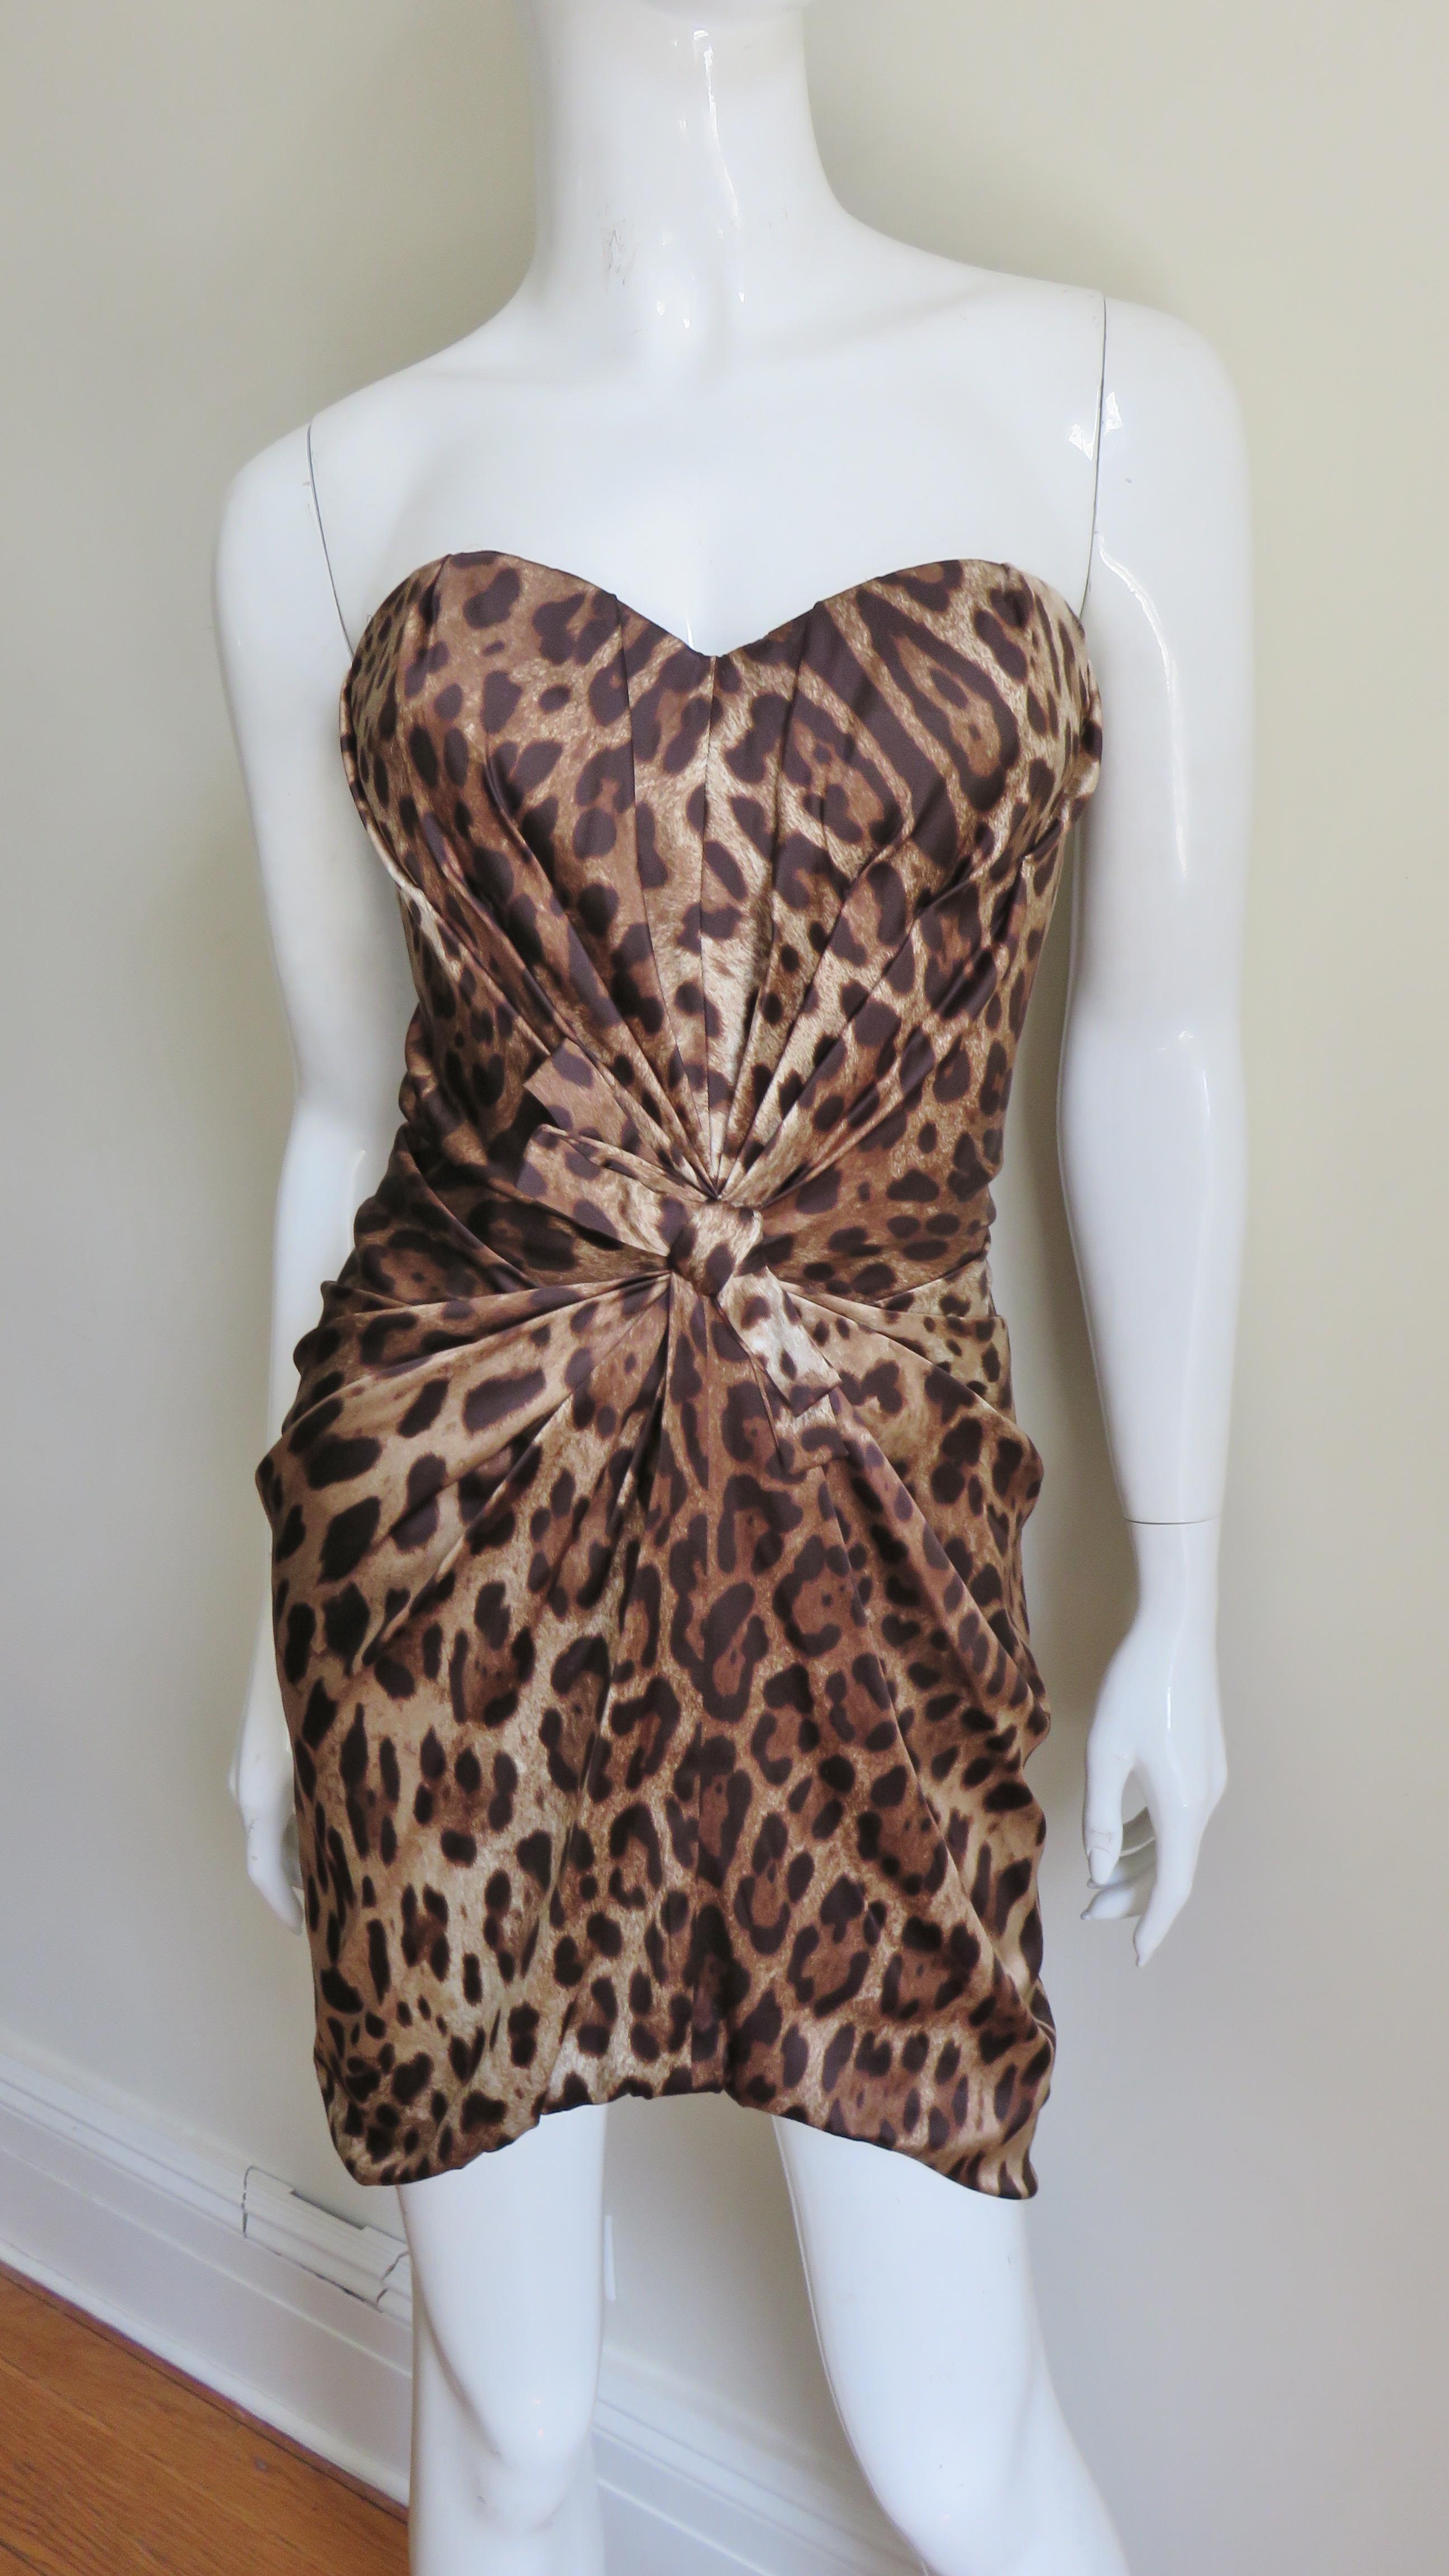 A stunning fine silk leopard print bustier dress from Dolce and Gabbana. Ruching emanating from the center front creates a flattering cinched waist, in contrast the back is unadorned. The dress has a back zipper, is fully lined in silk and the